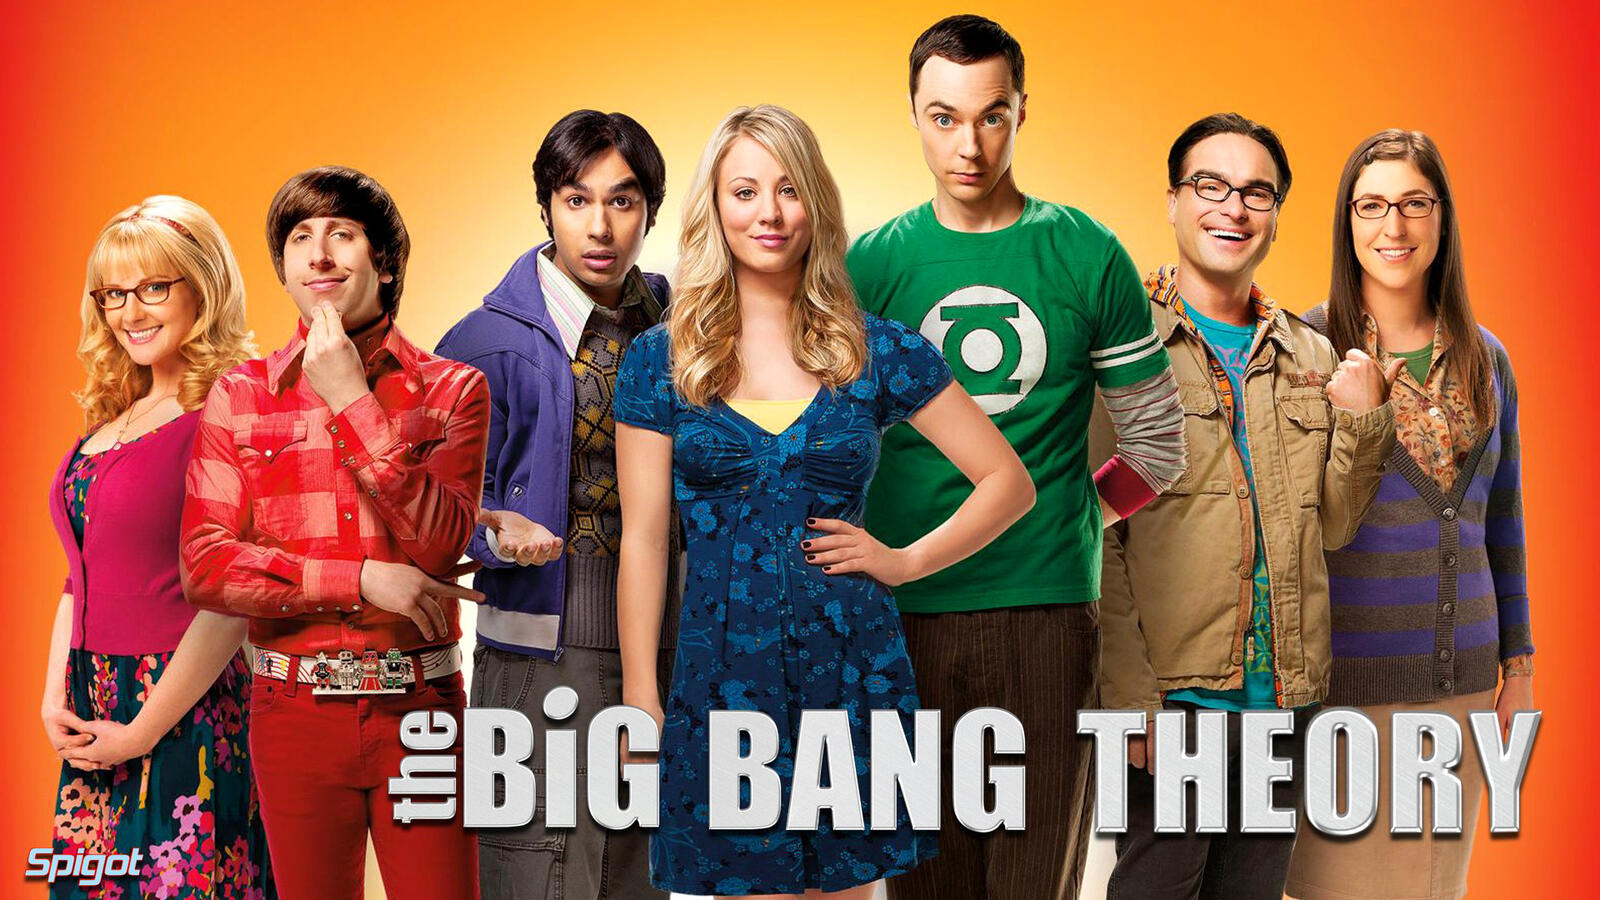 Wallpapers Movies TV series The Big Bang Theory on the desktop